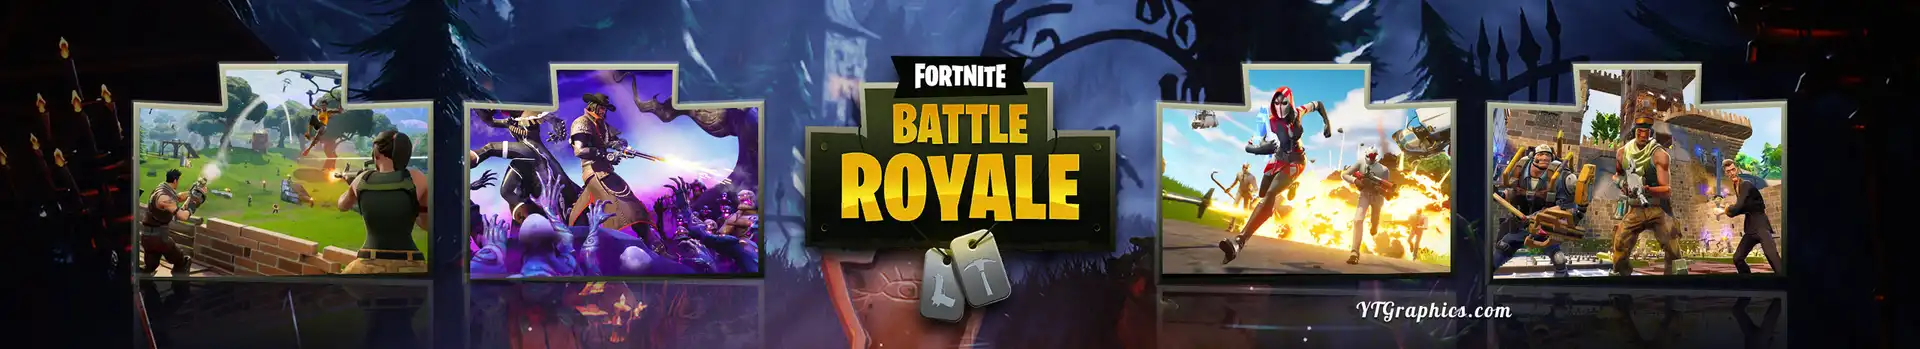 Second Fortnite preview